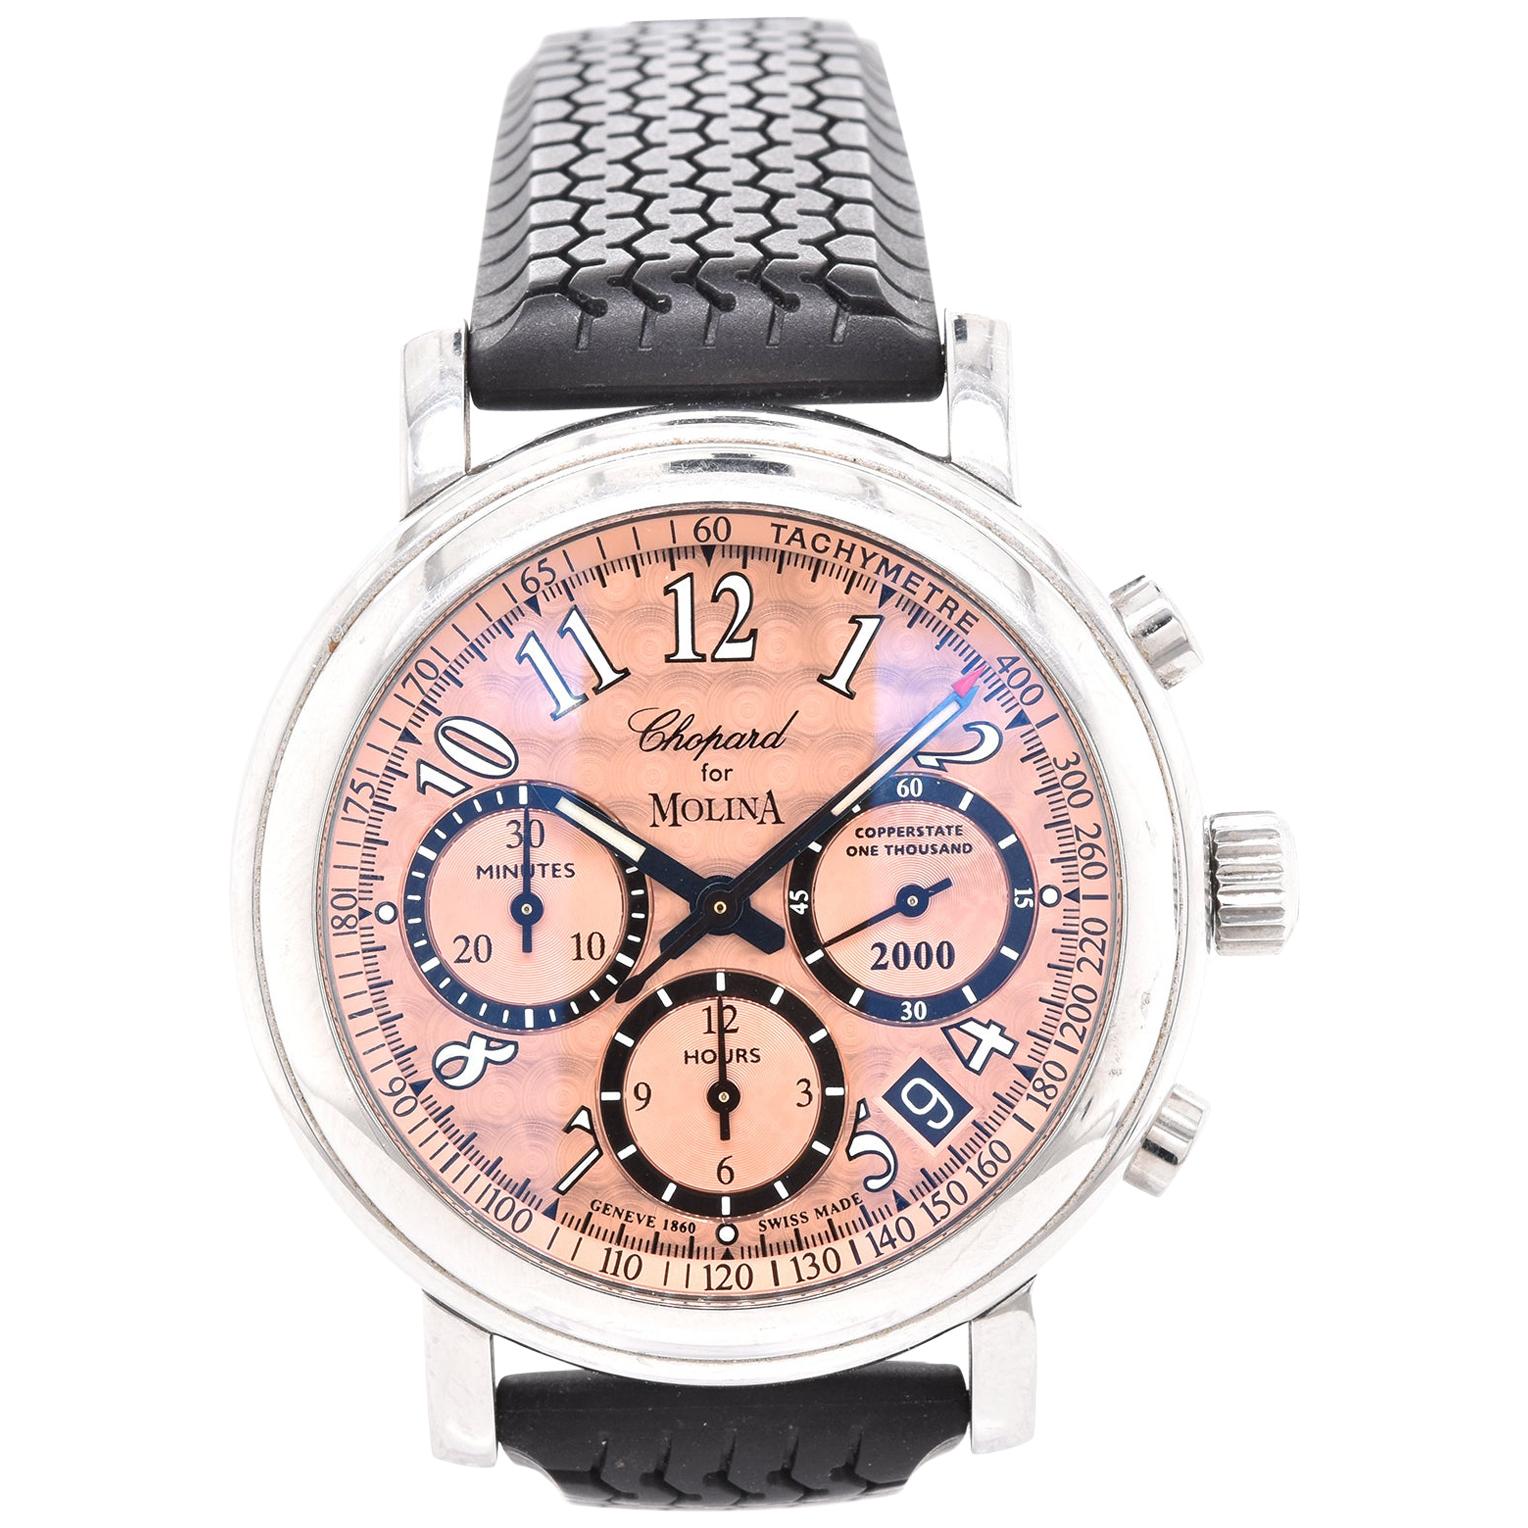 Chopard Stainless Steel For Molina Copperstate One Thousand Chronograph